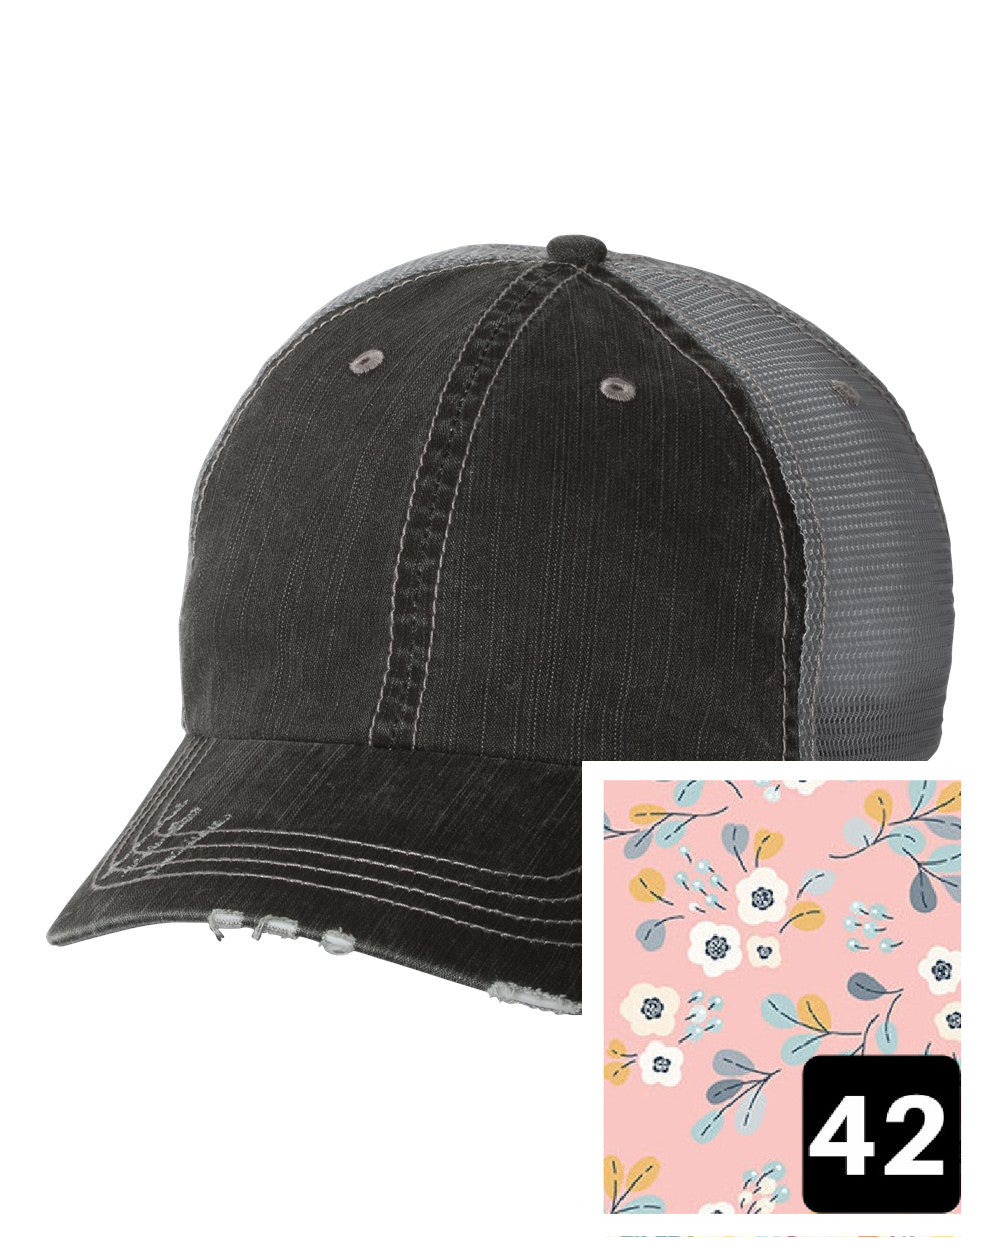 gray distressed trucker hat with light blue and pink mosaic fabric state of UP of Michigan